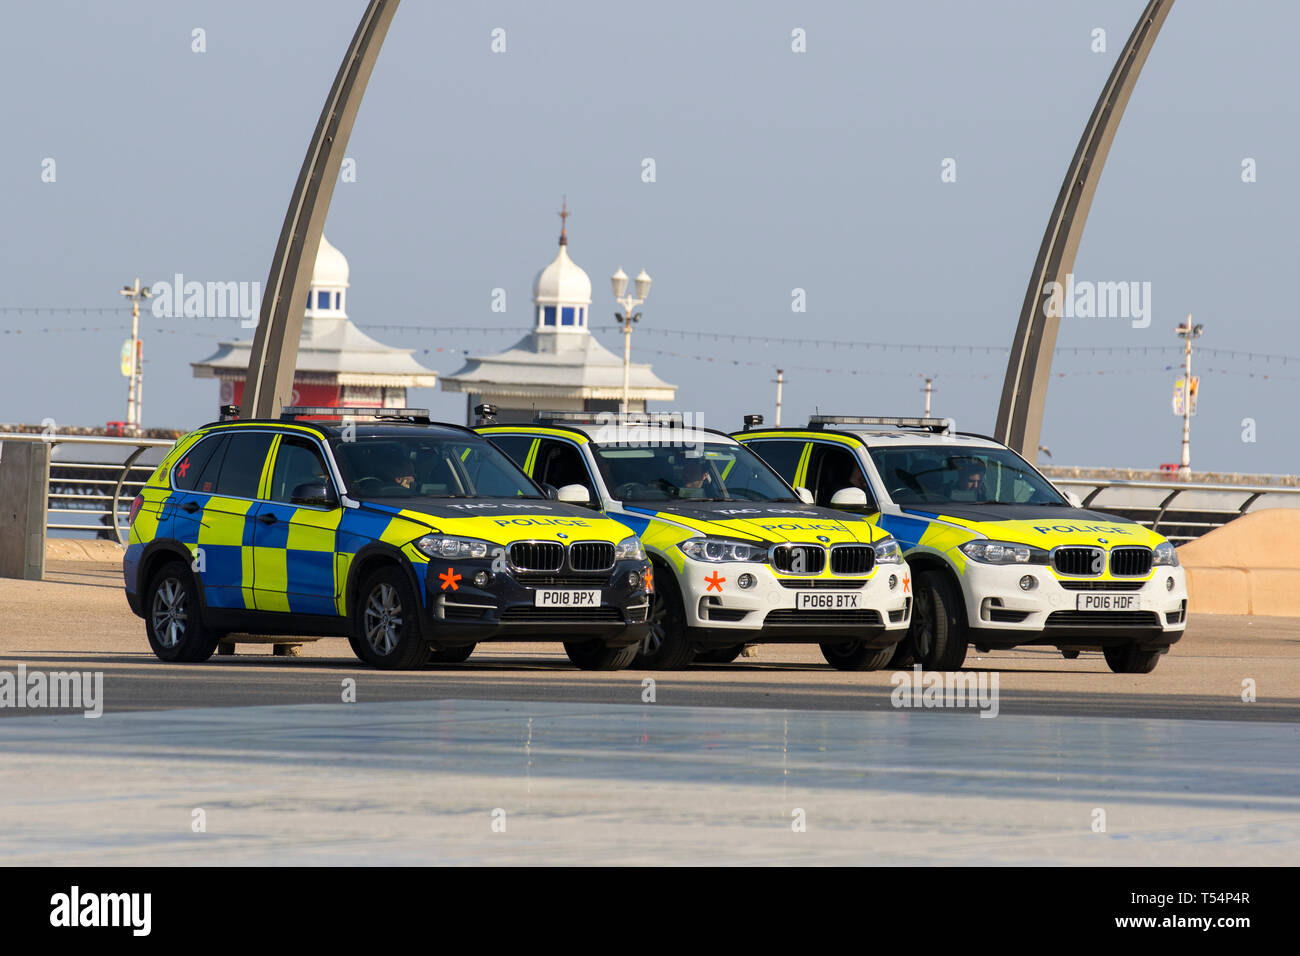 Blackpool, Lancashire. 21st April, 2019. UK Weather.  Bright sunny start to the day at the coast as people take to the seafront promenade for a light exercise and to enjoy the sea breeze on what is forecast to be the hottest day of the Easter holidays. Armed police are on patrol in Blackpool as part of the security operation surrounding Blackpool's Easter festival, Credit; MediaWorldImages/AlamyLiveNews. Stock Photo